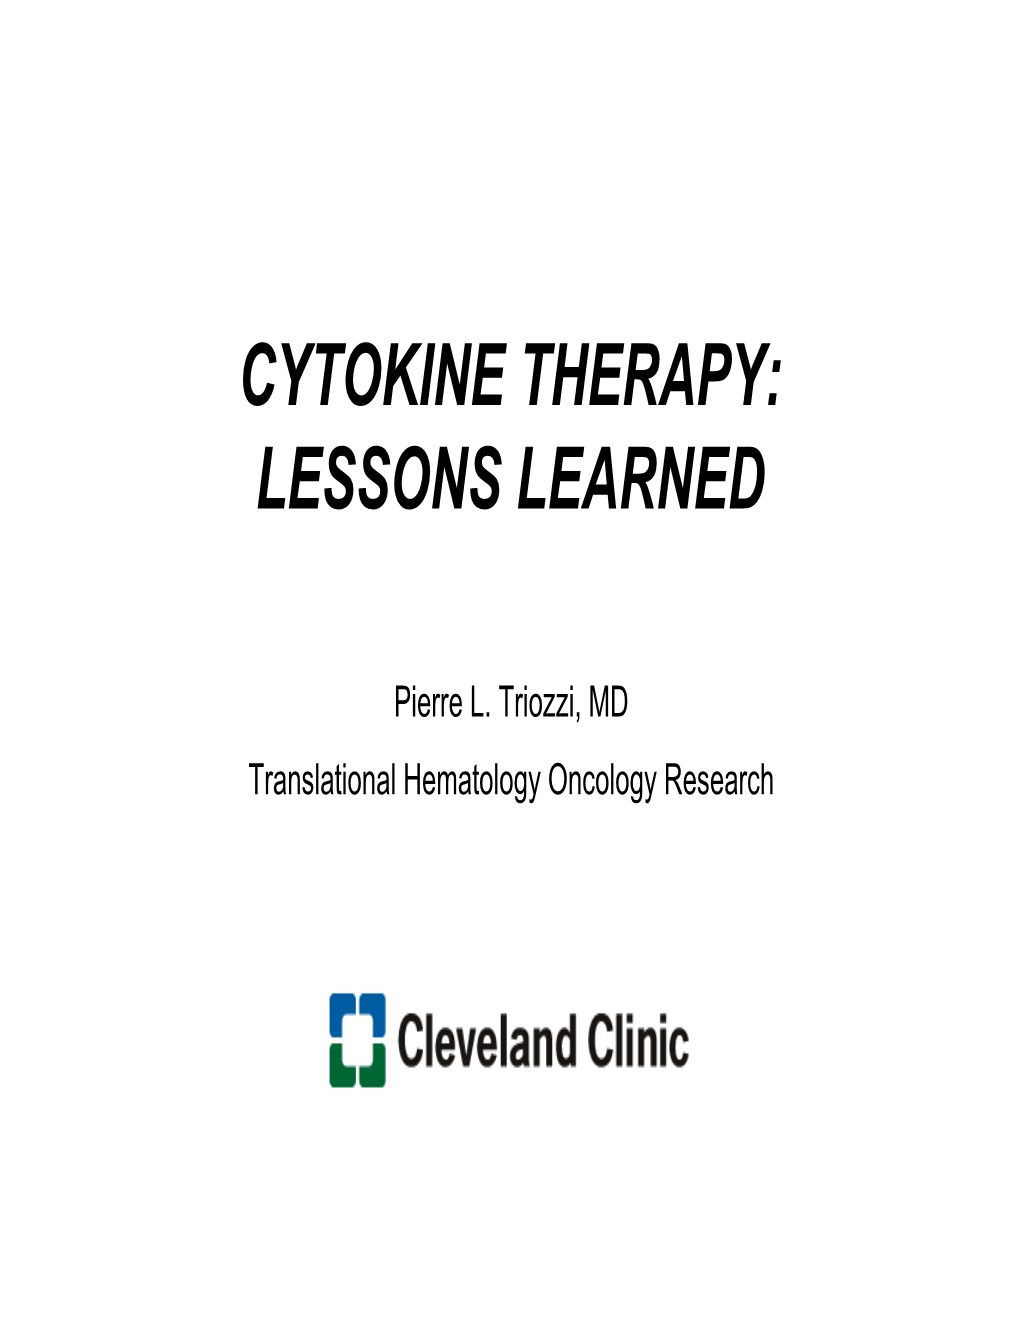 Cytokine Therapy: Lessons Learned